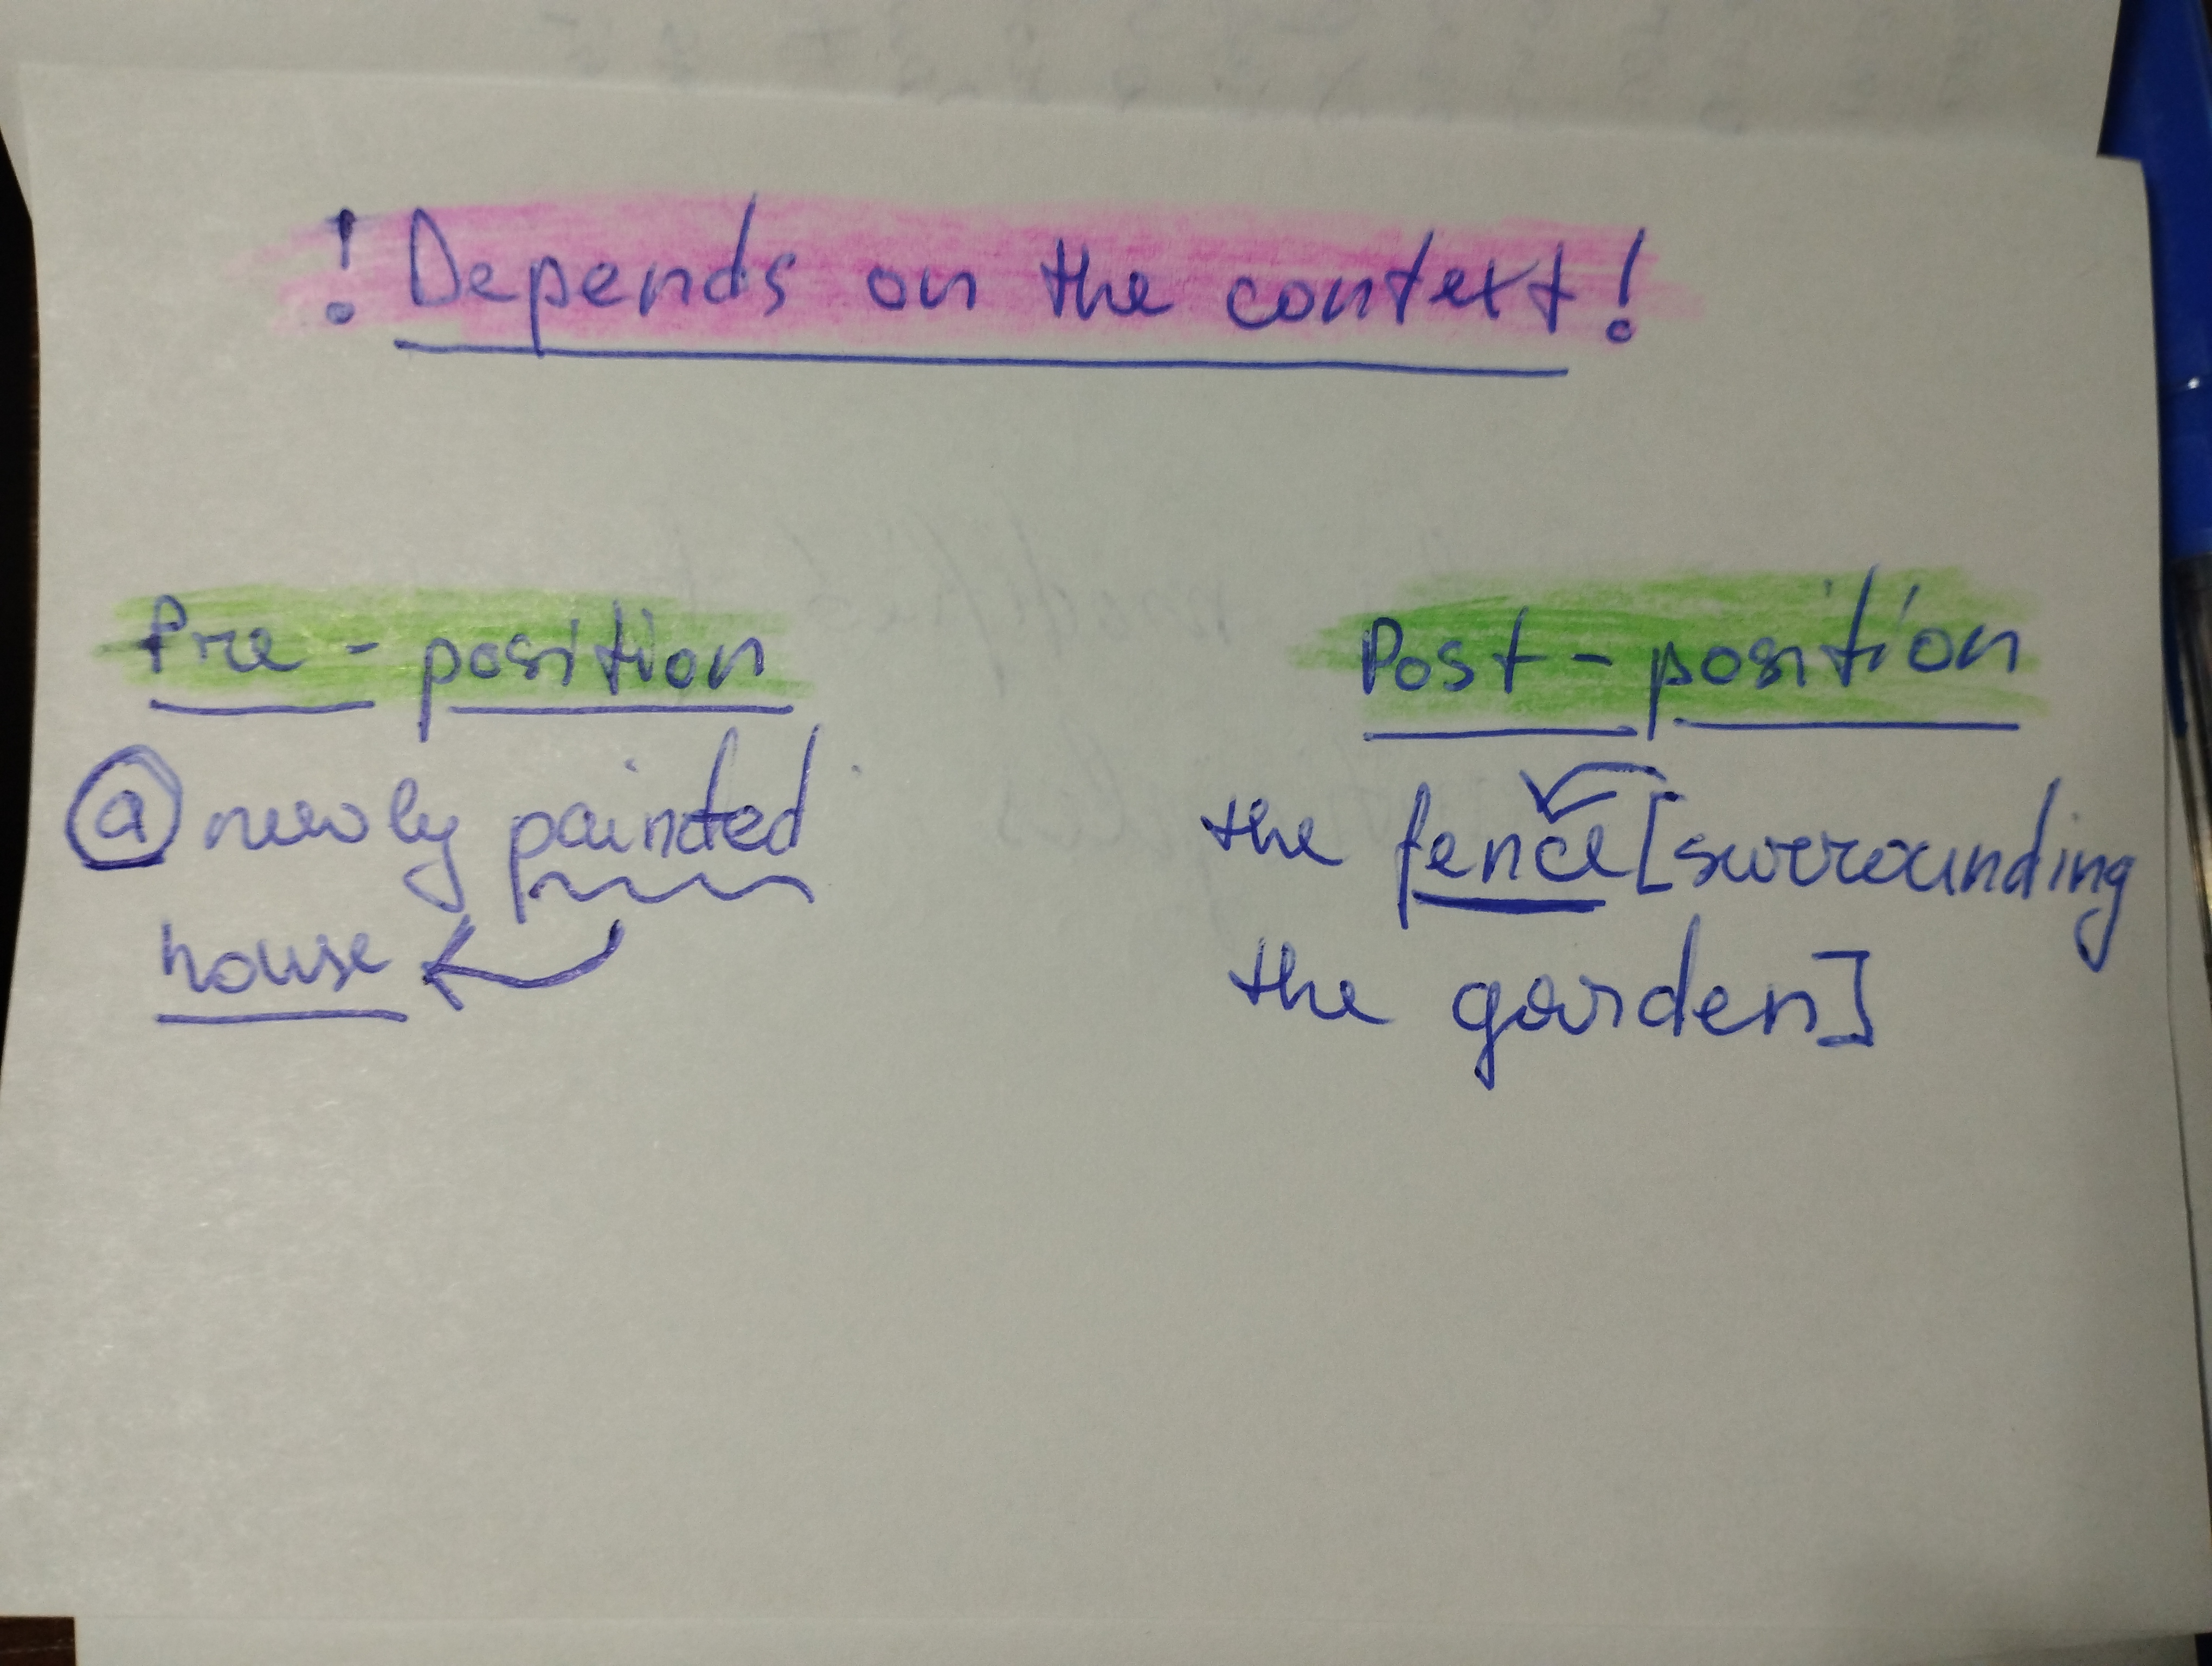 <p>Depends on the context. Participles: Pre-position (a newly painted house); Post-position (the fence surrounding the garden)</p>